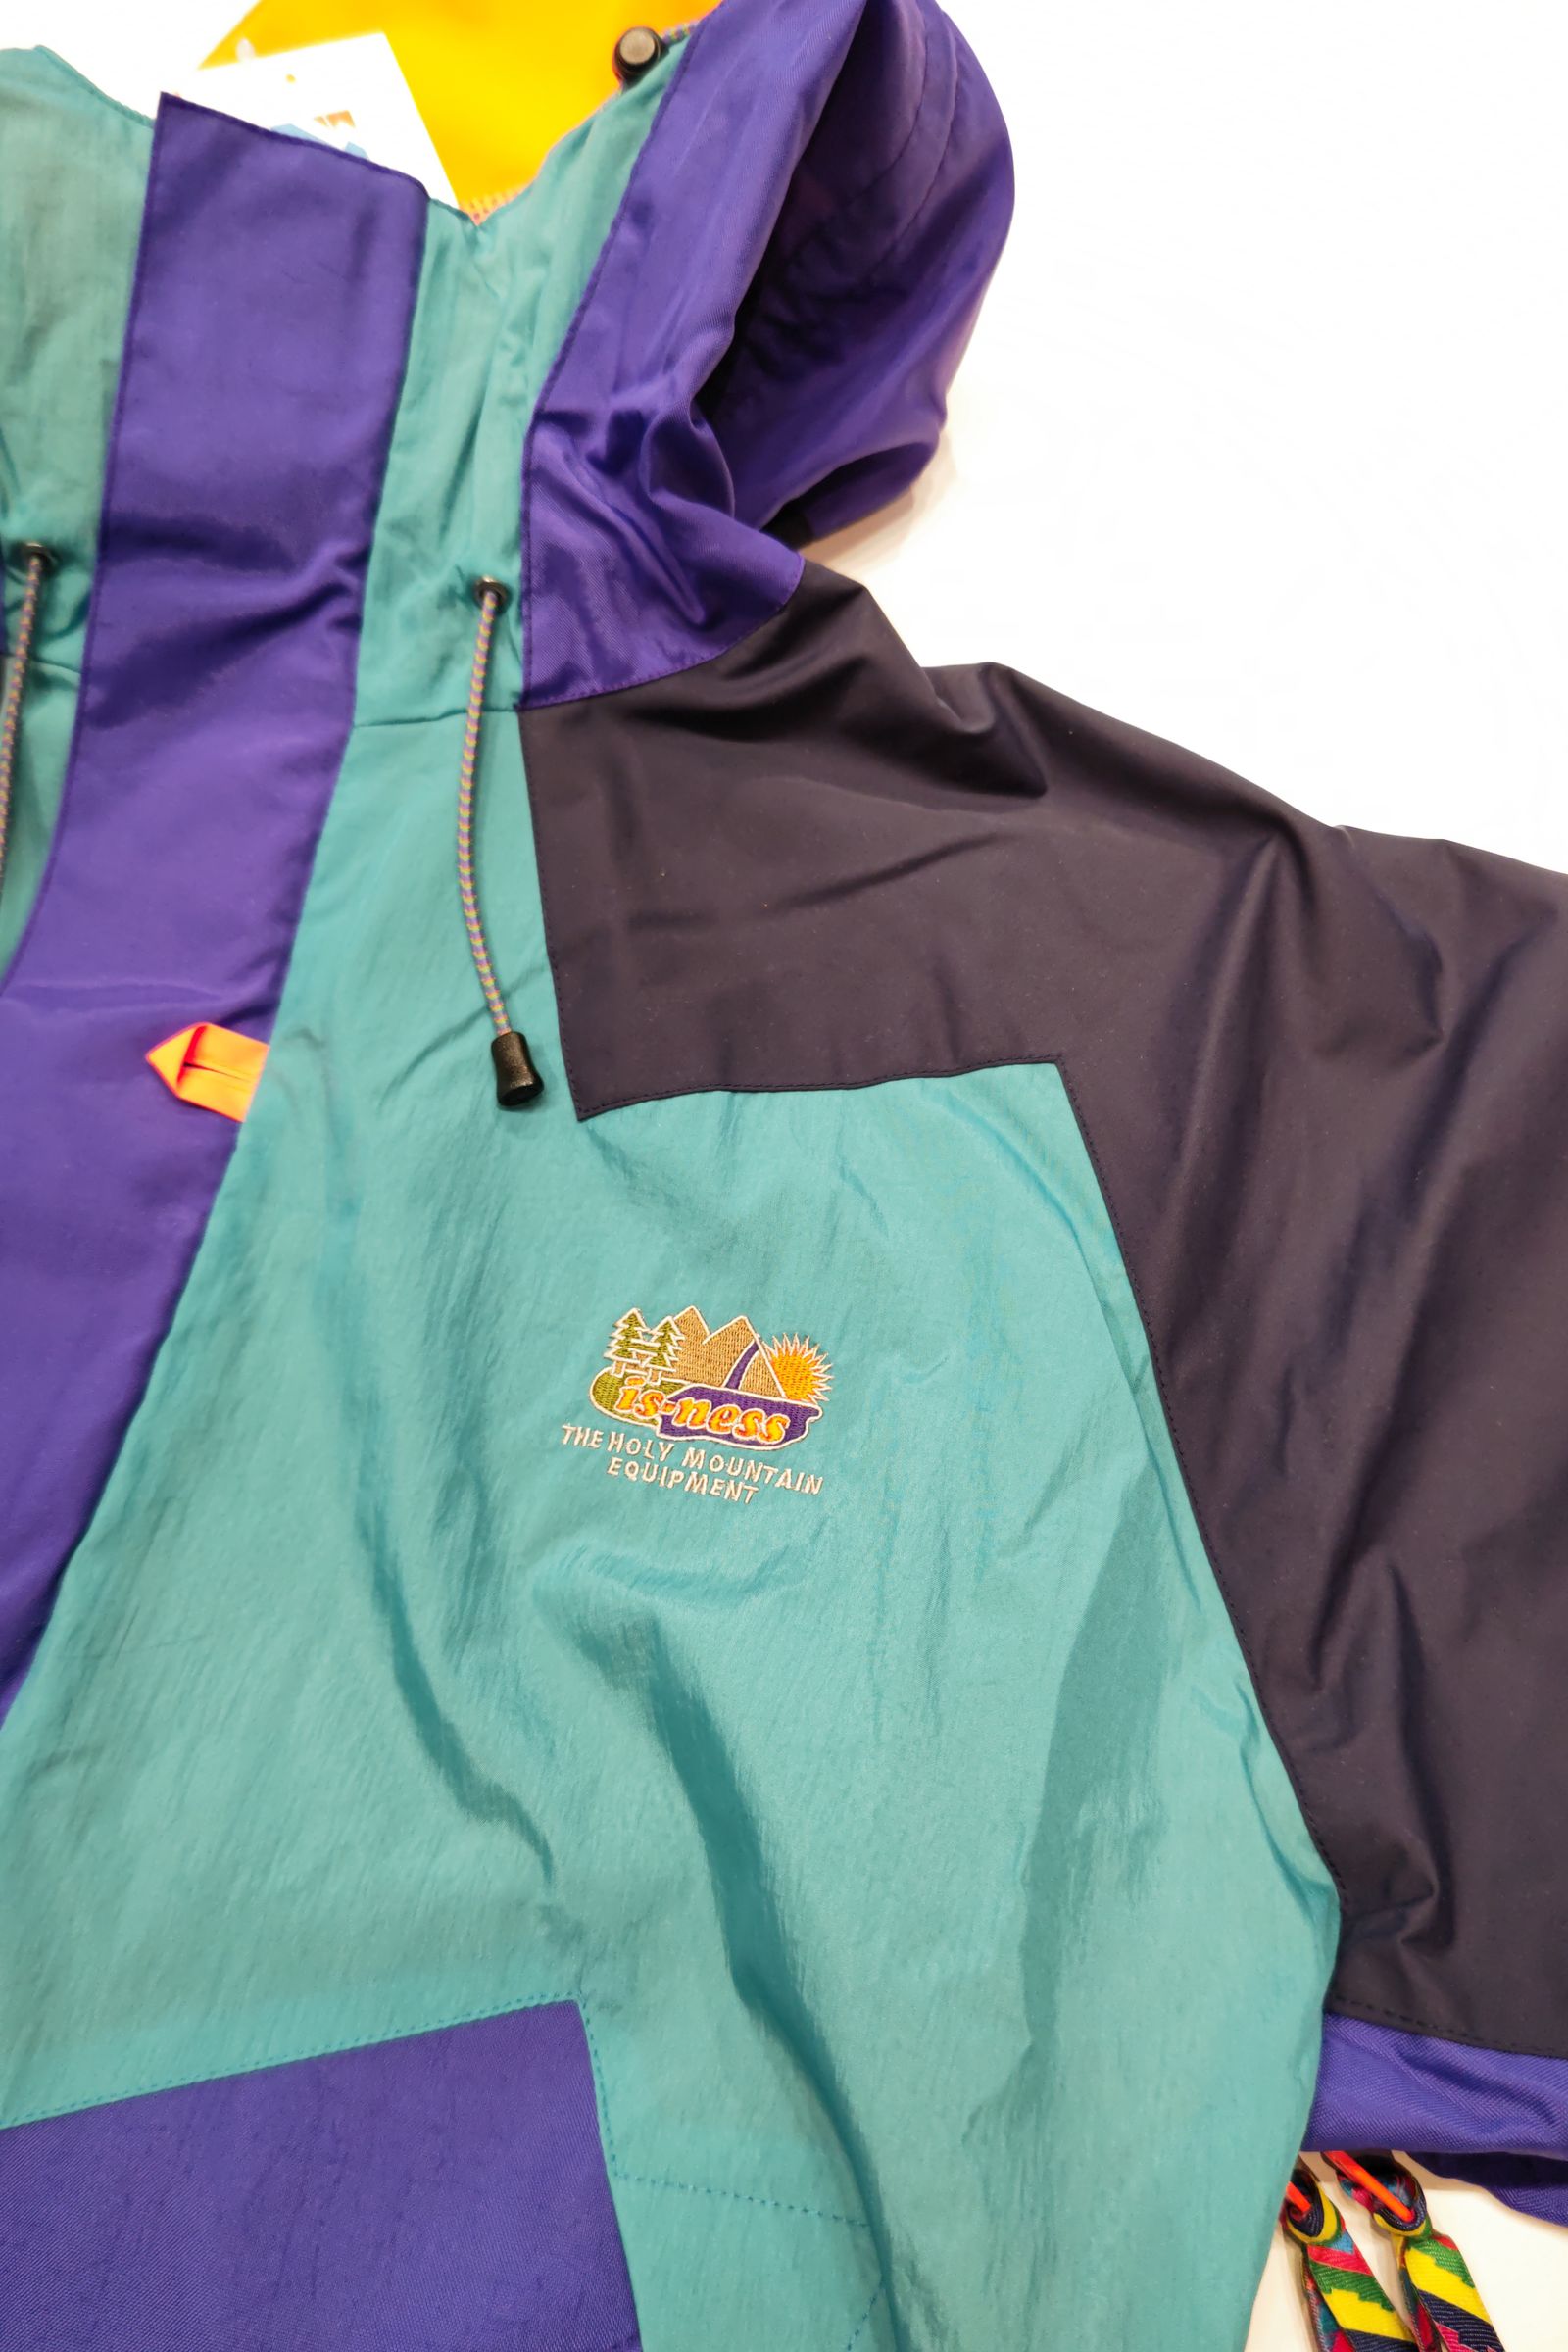 is-ness - thm annapurna mountain jacket -purle×blue- 23ss | asterisk